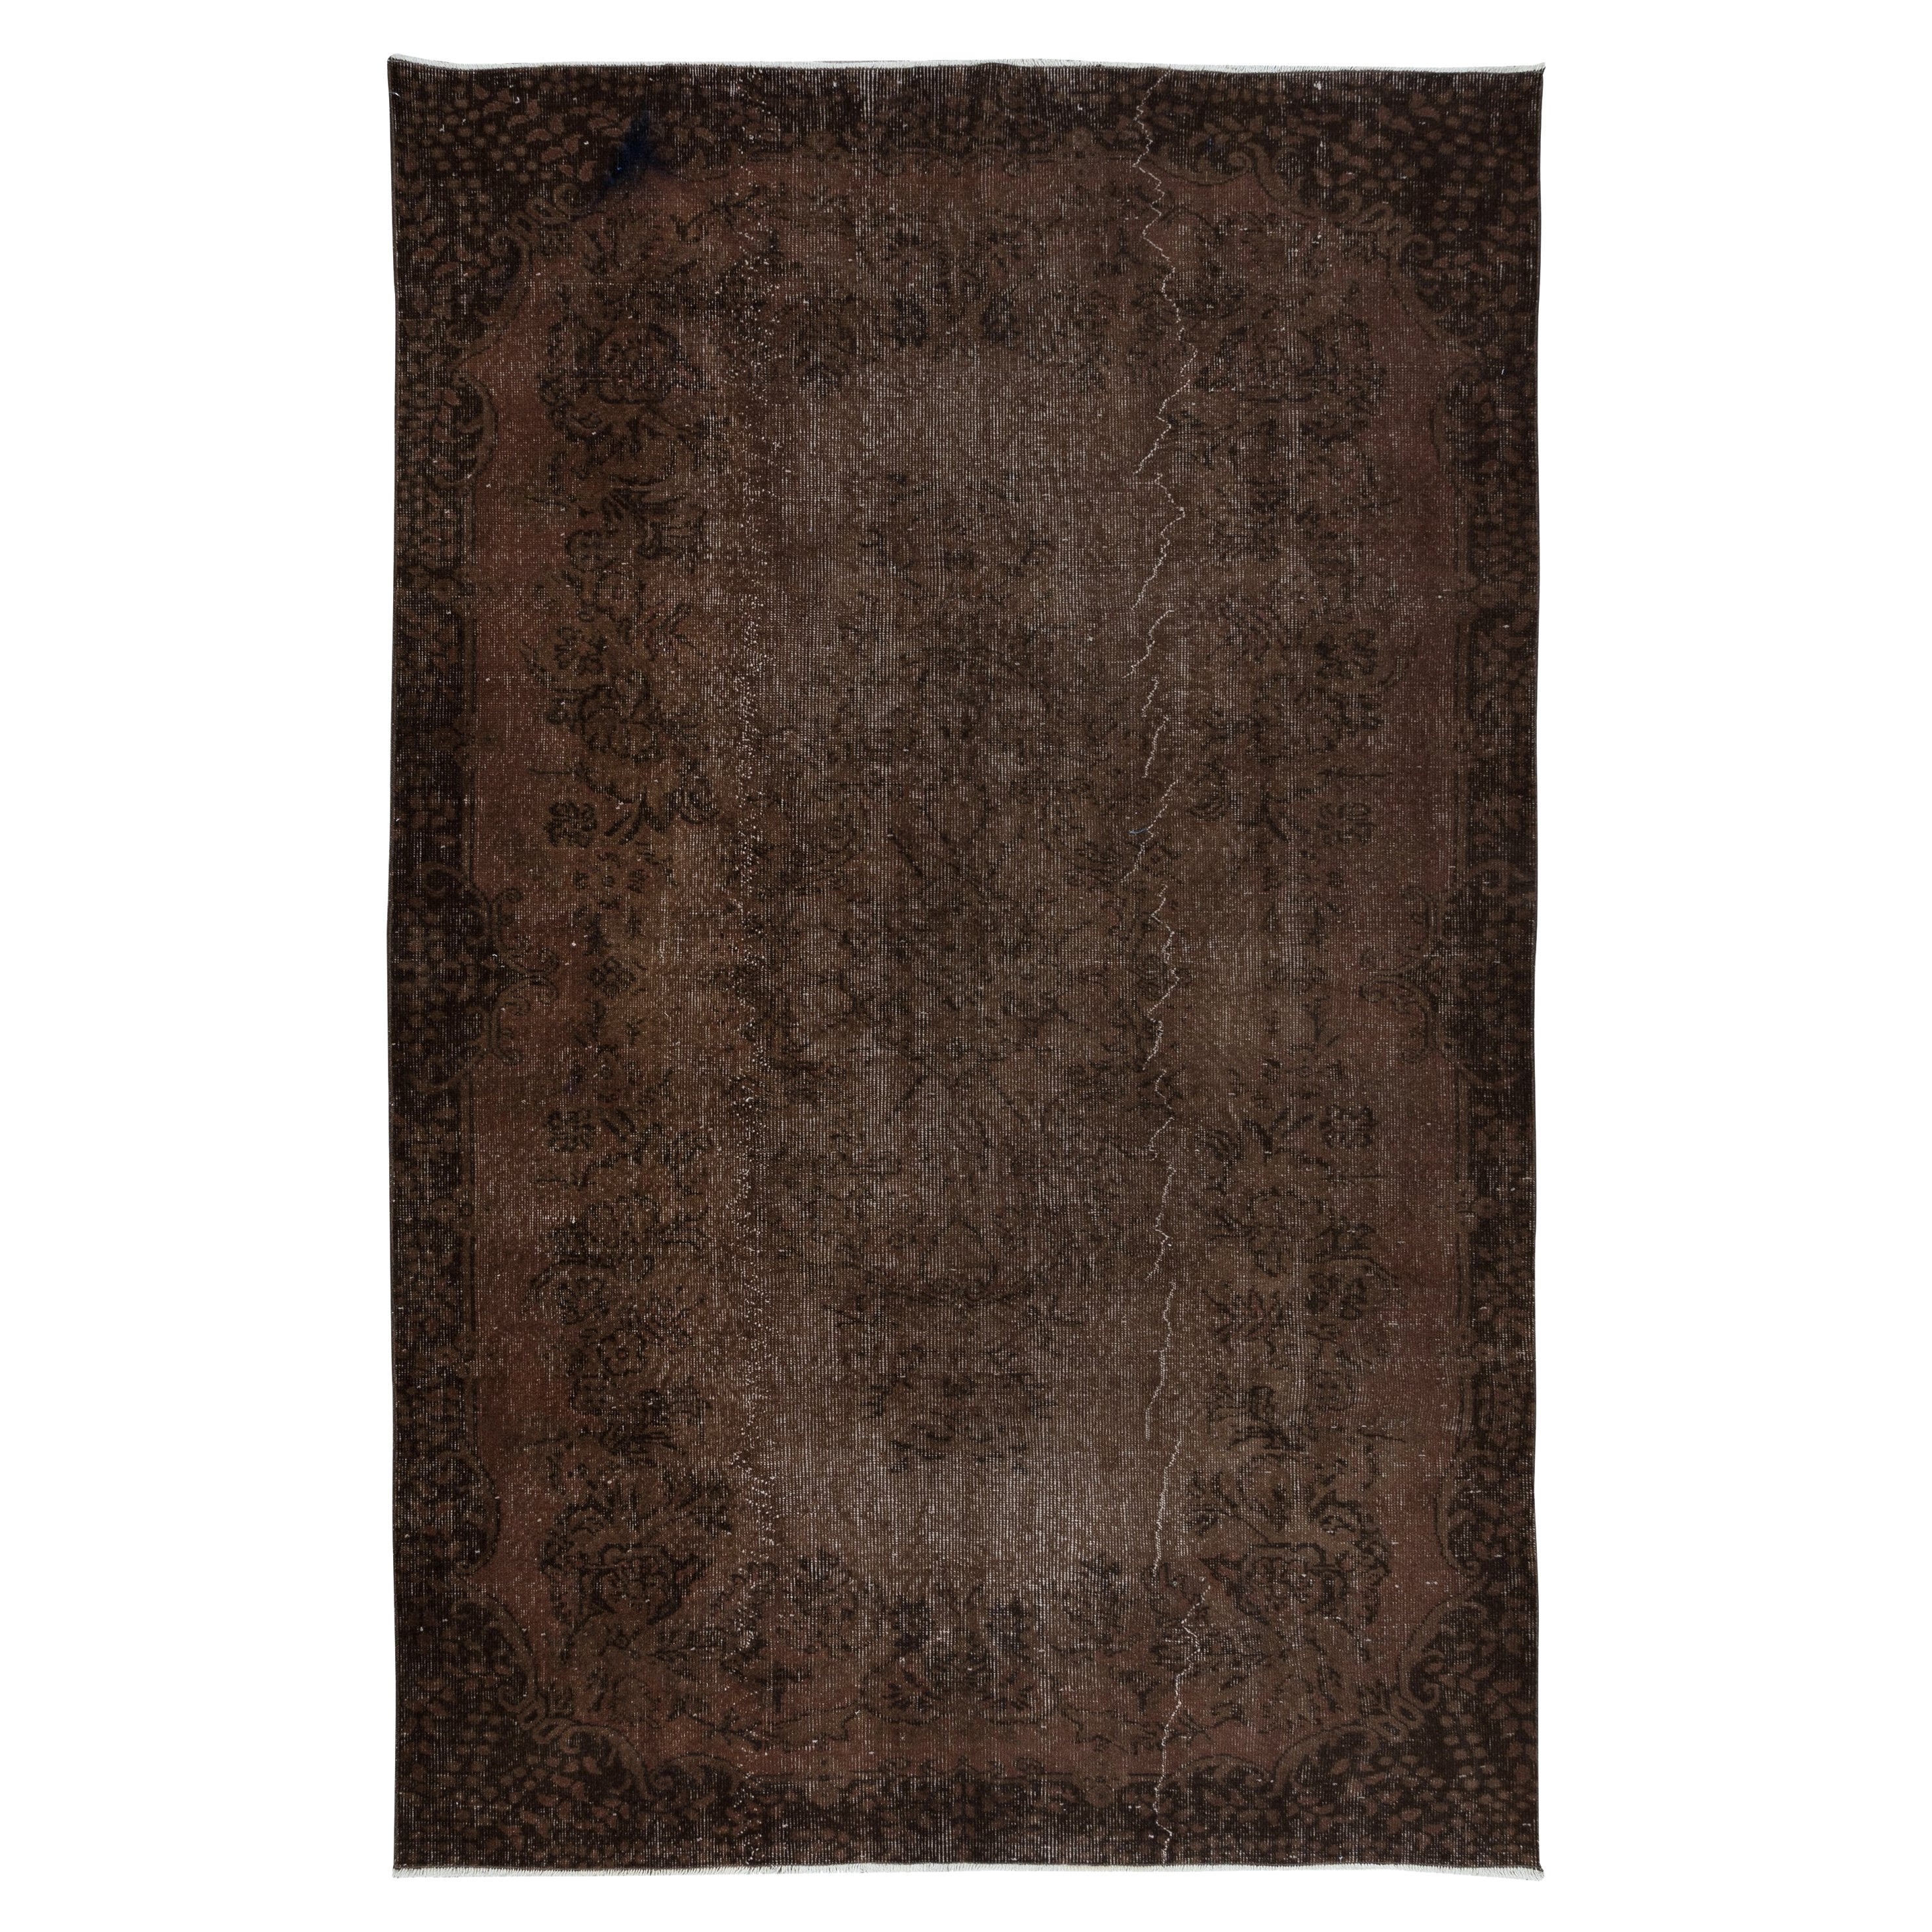 6x9.4 Ft Brown Wool Area Rug, Hand Knotsted in Turkey, Great 4 Modern Interiors